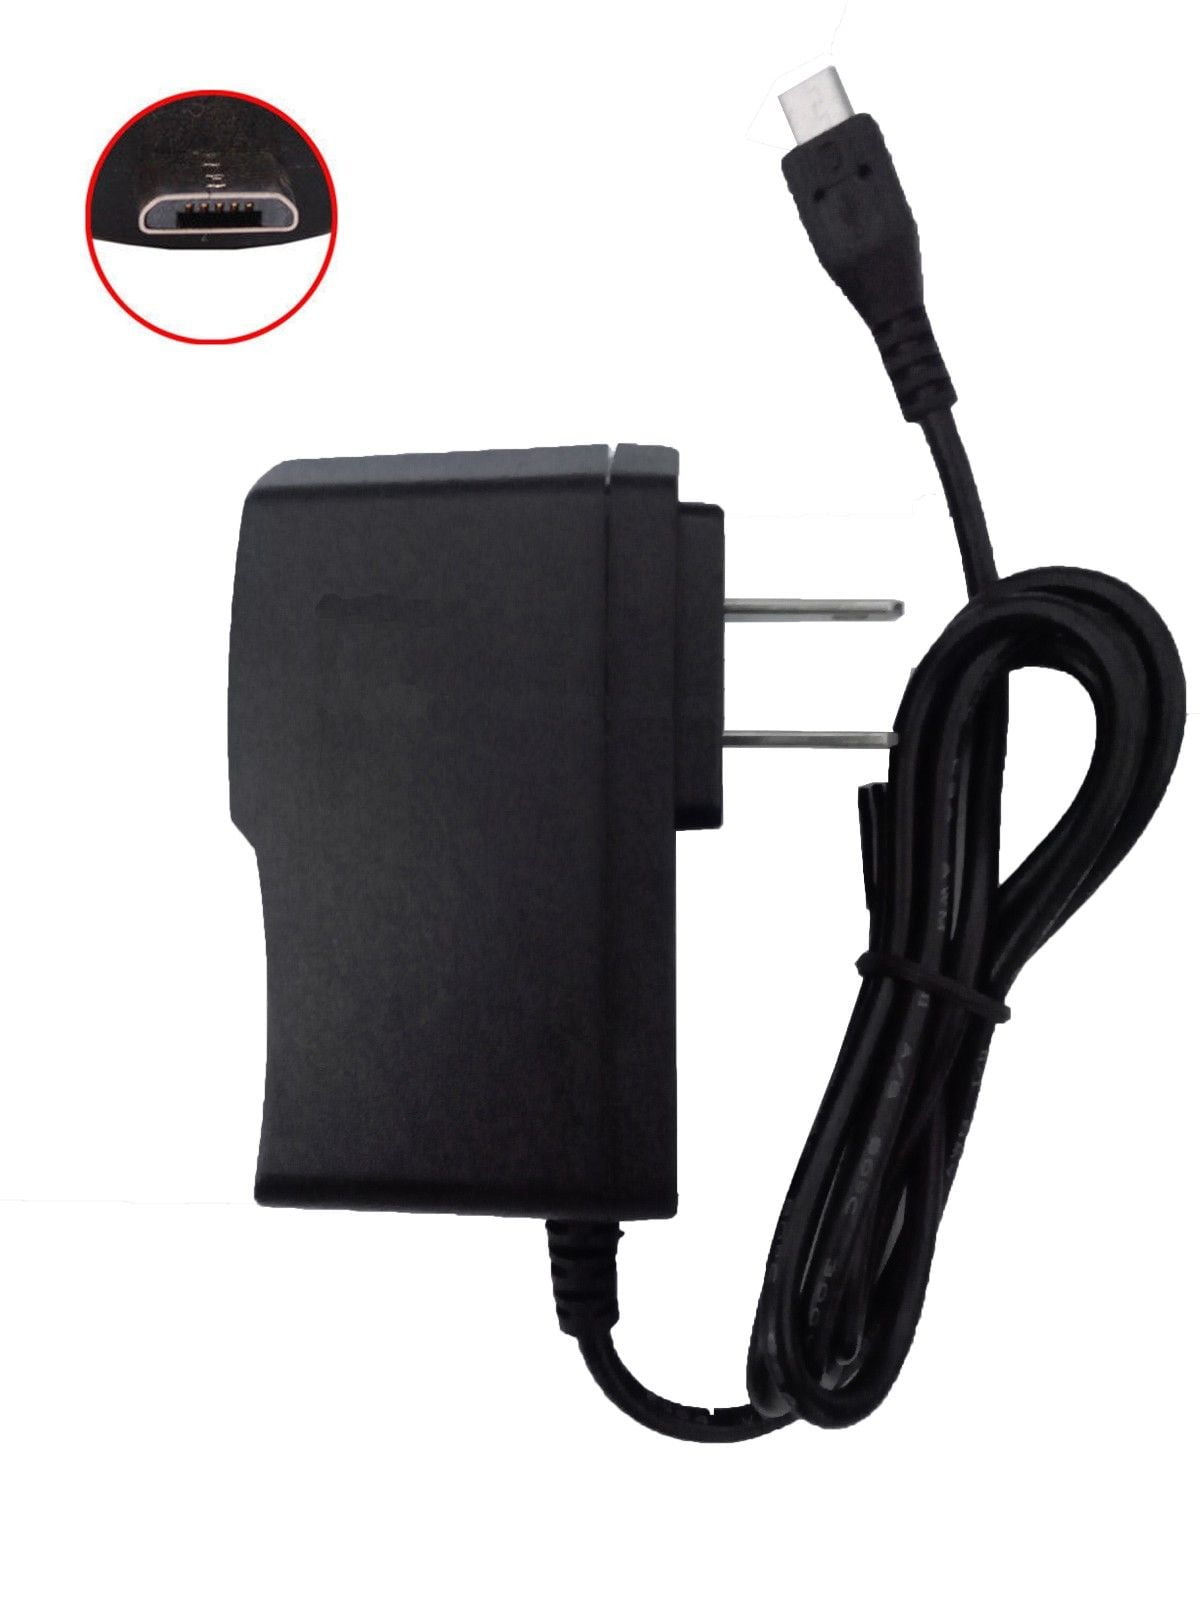 AC Adapter Wall Charger DC Power Supply For Nextbook 8 NX785QC8G Android Tablet 